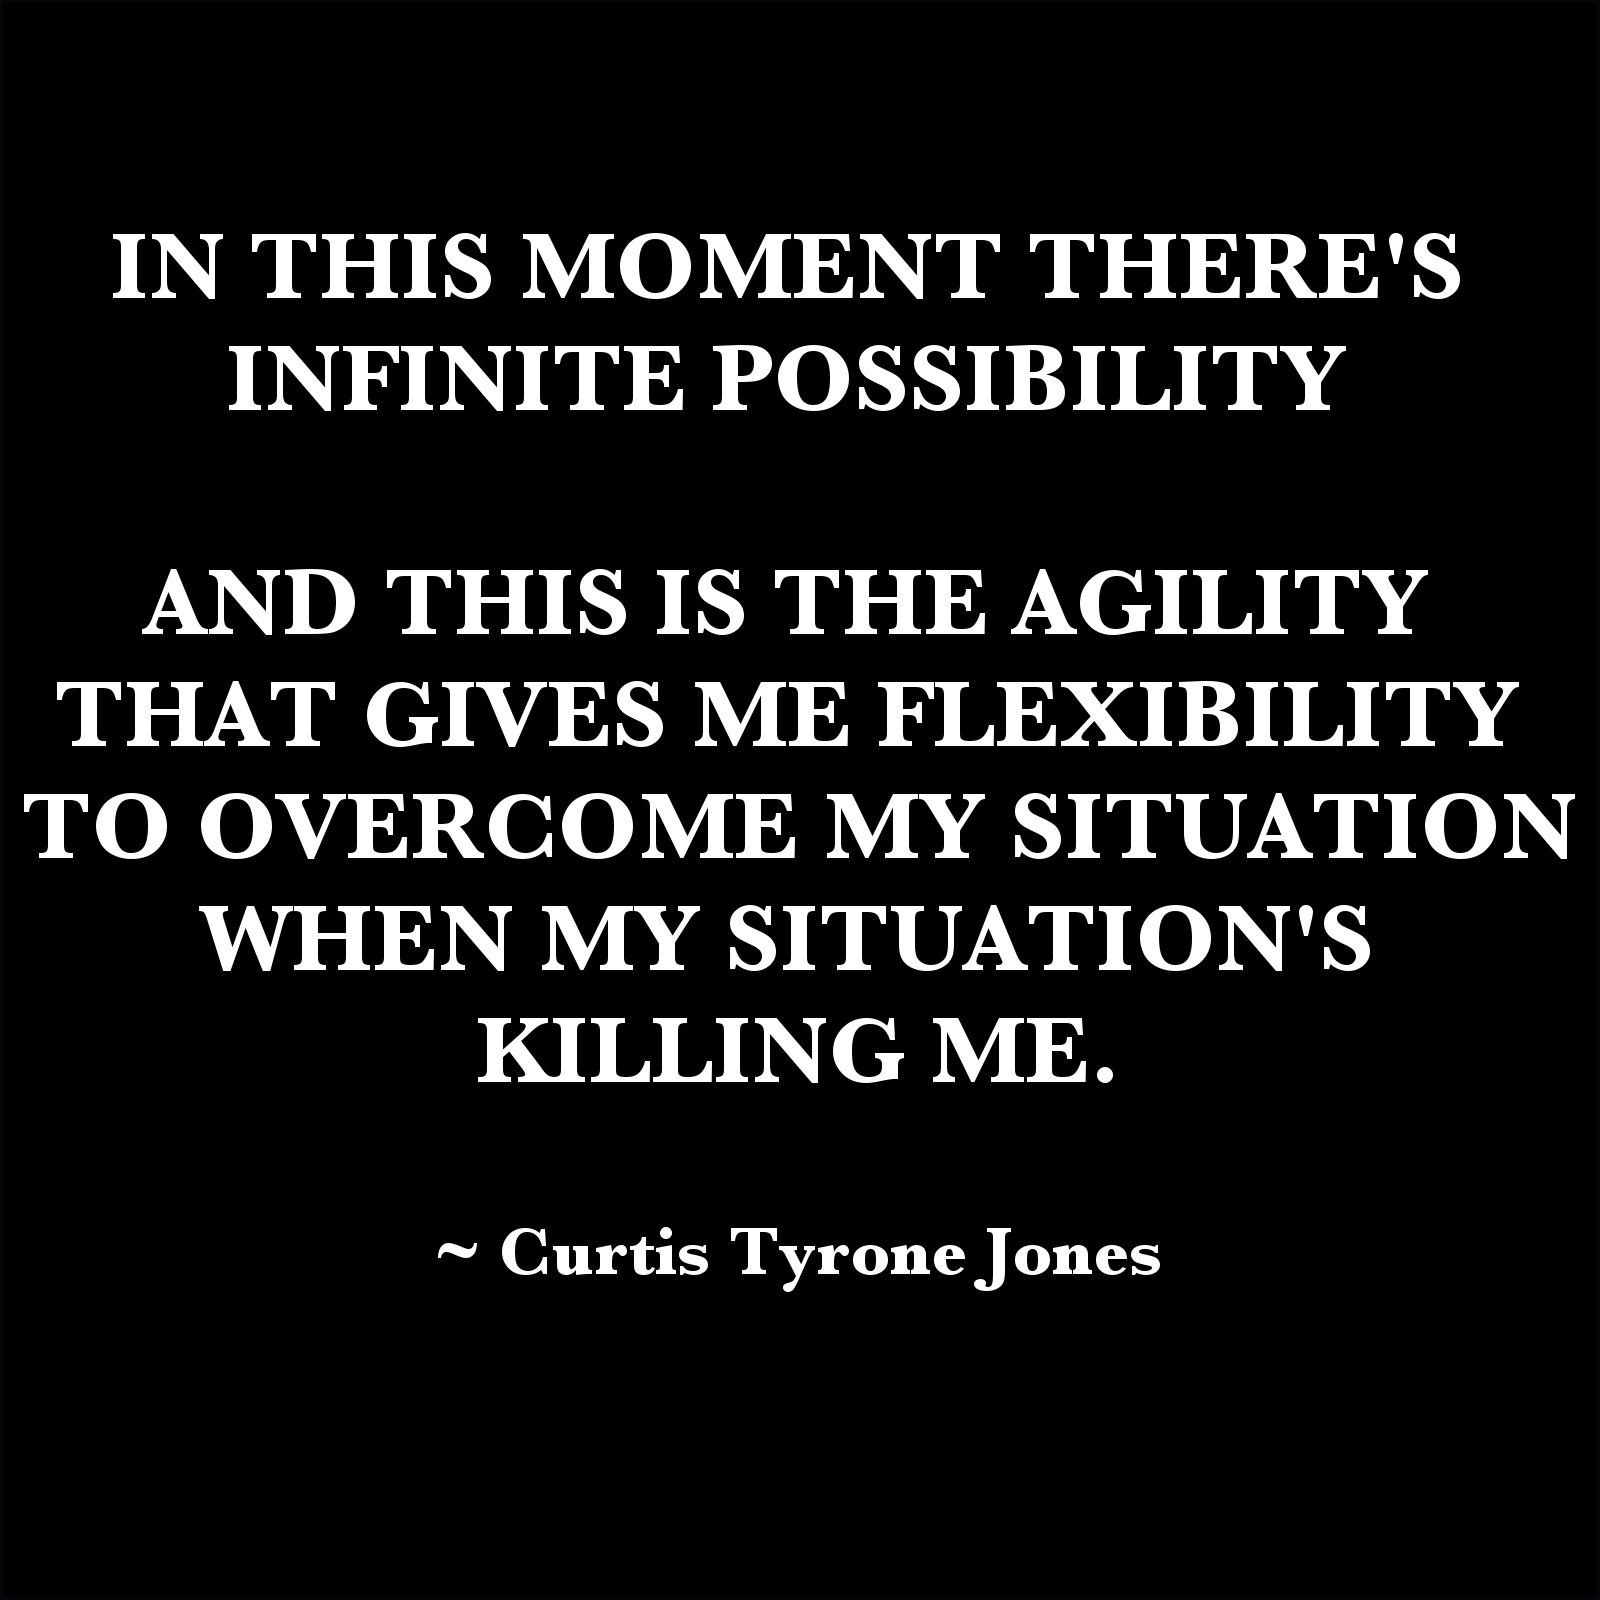 In this moment there's infinite possibility and this is the agility that gives me flexibility to overcome my situation when my situation's killing me. Curtis Tyrone Jones